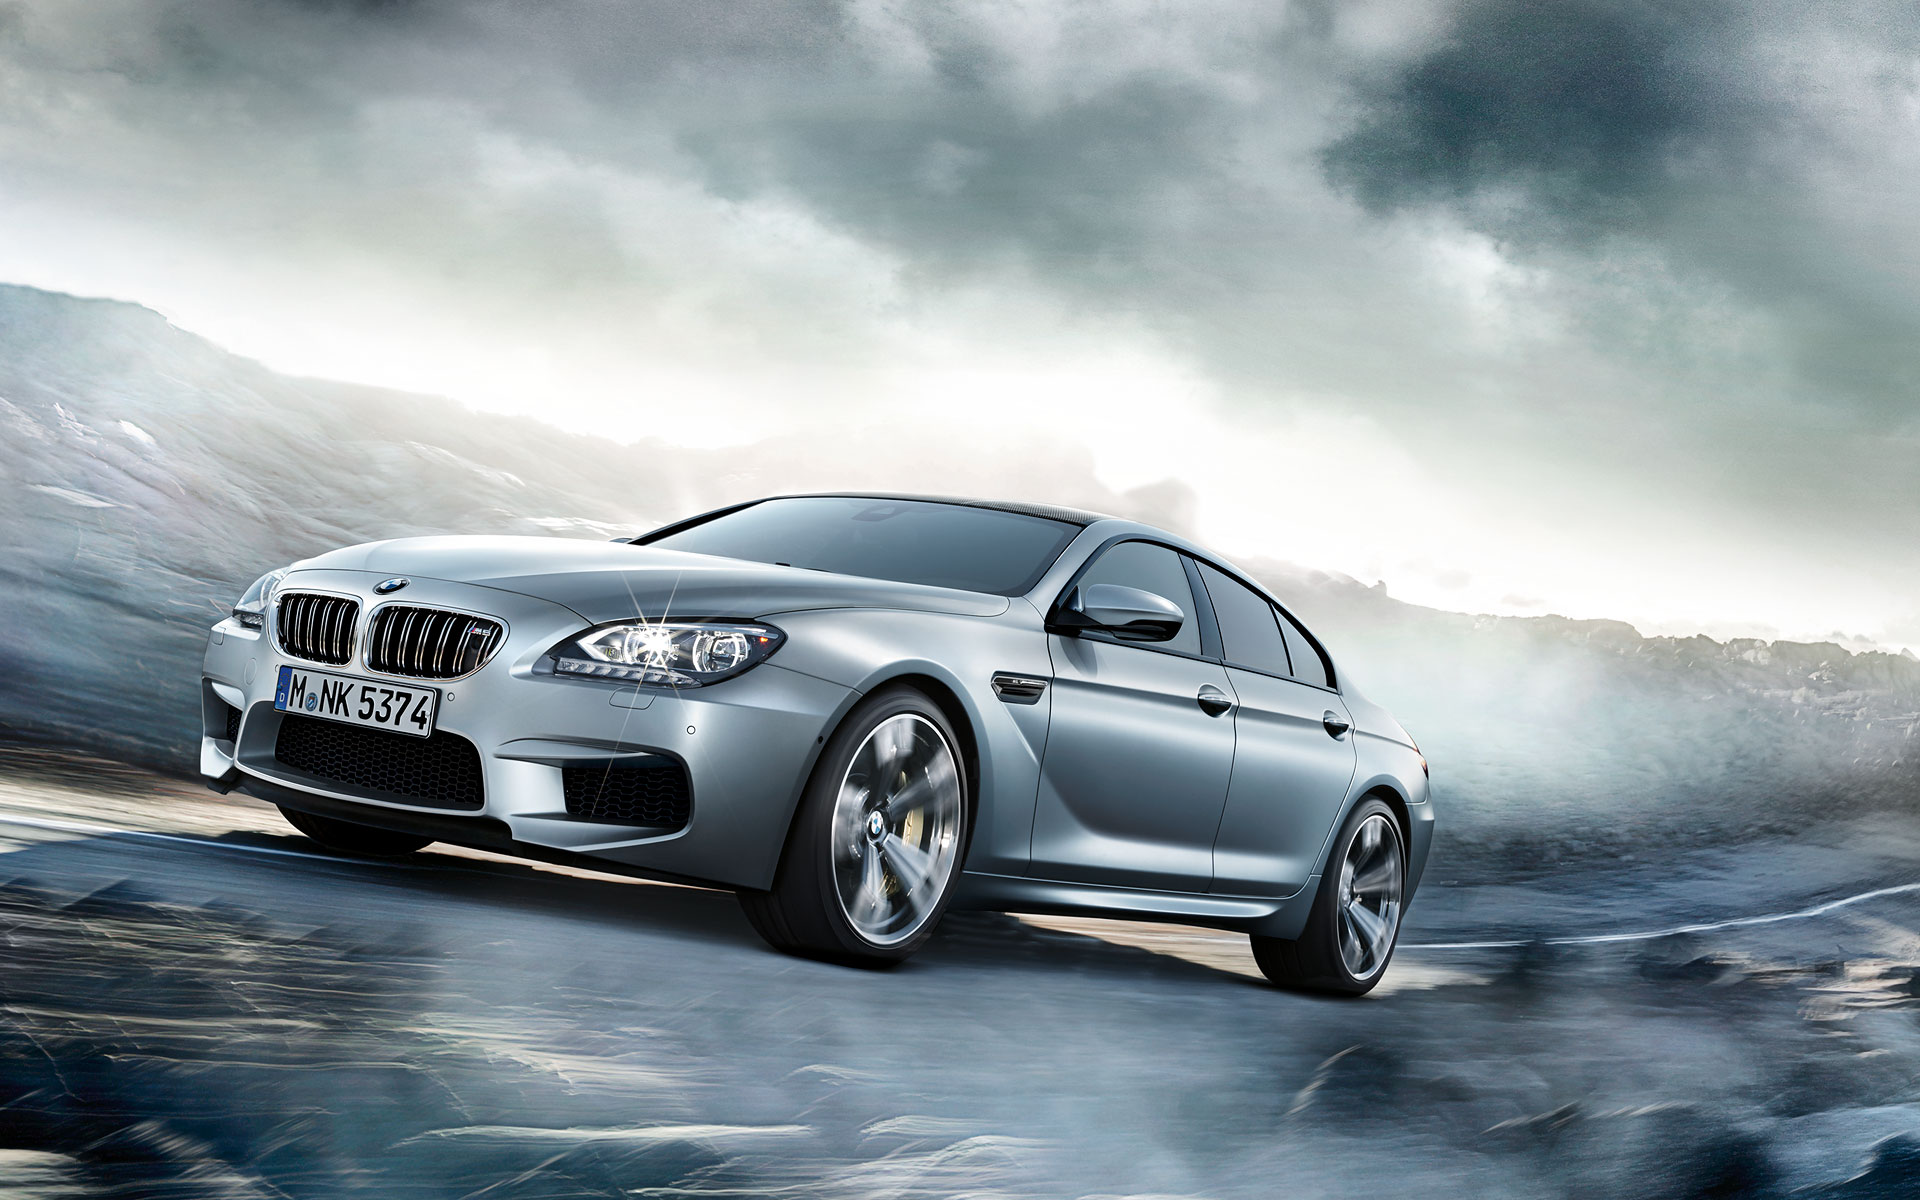 Wallpapers: BMW M6 Gran Coupe